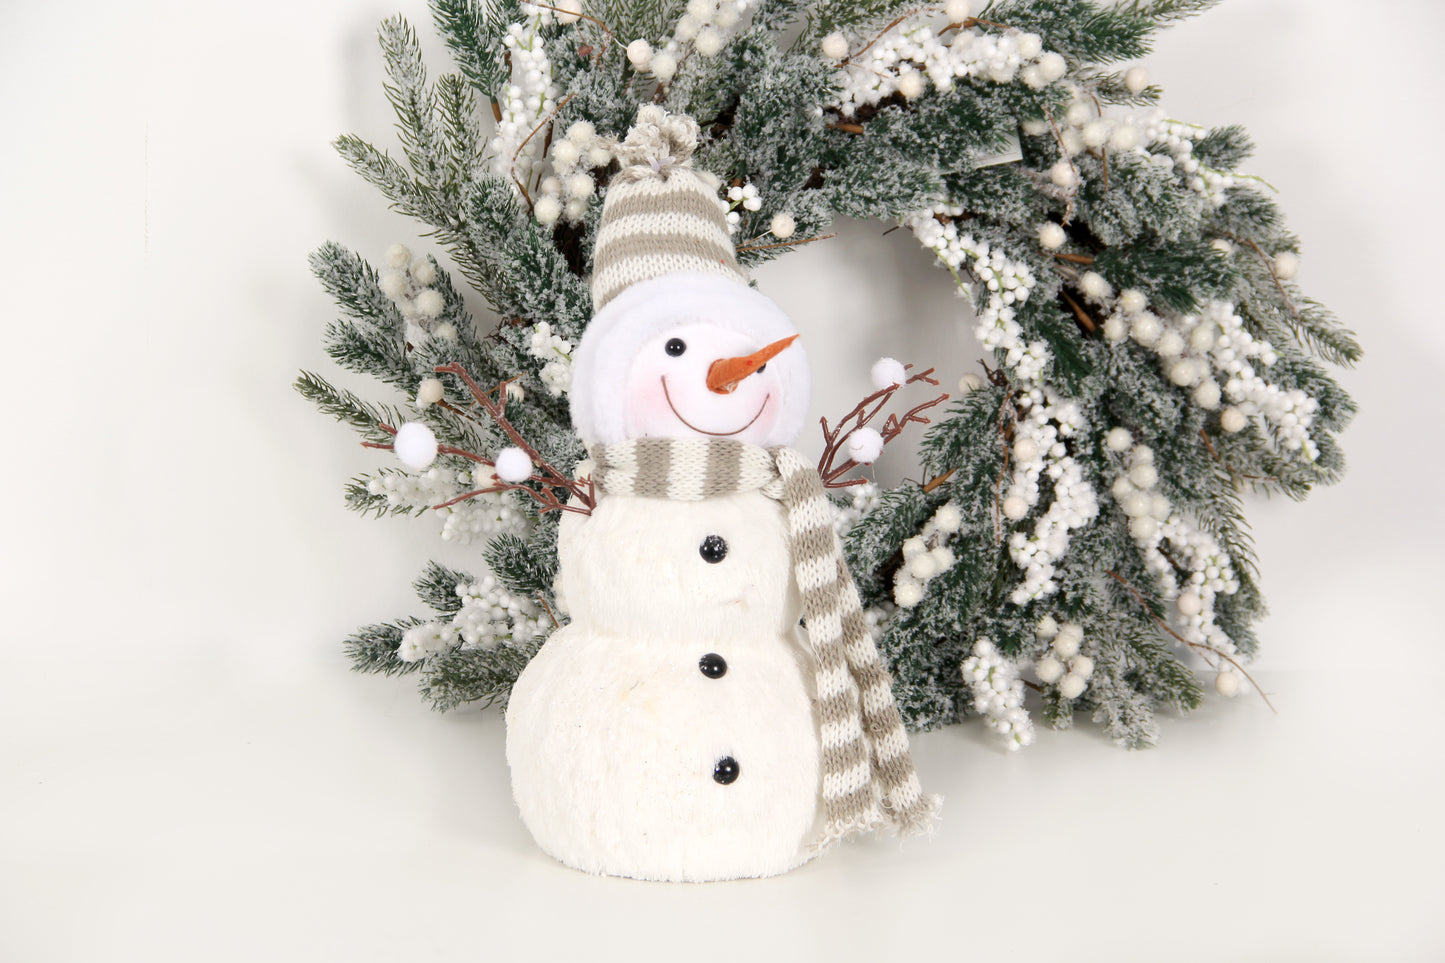 34cm Snowman Decorating Make a Snowman Winter Holiday Outdoor Decoration